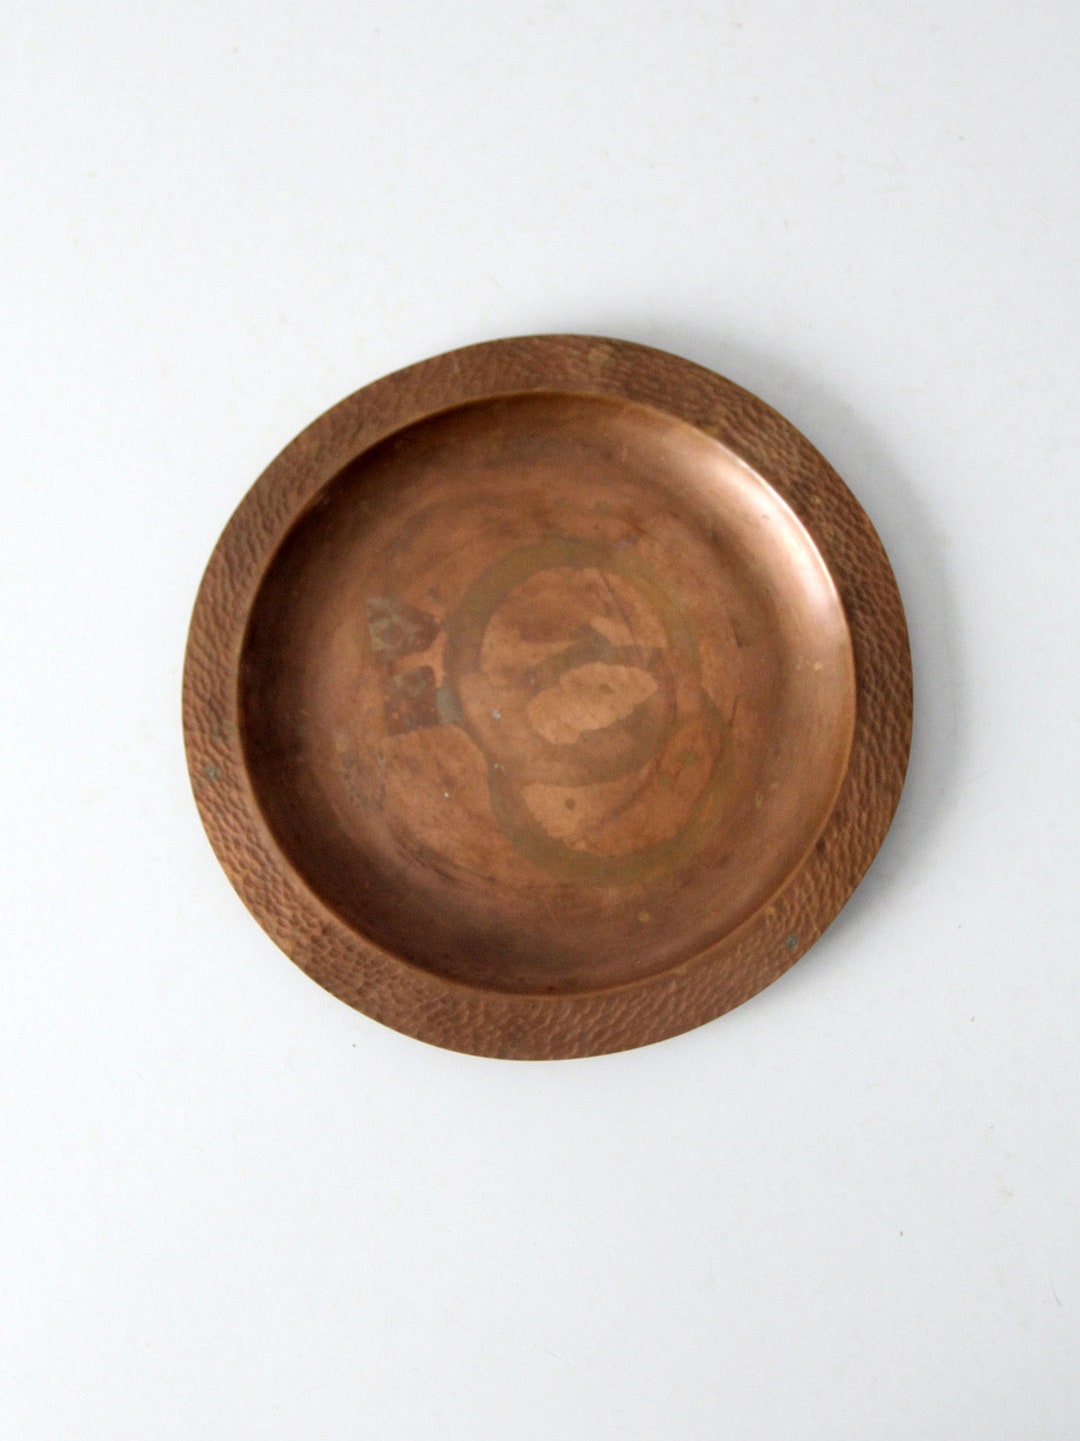 Hammered Copper Shrine Plate - 7 inch